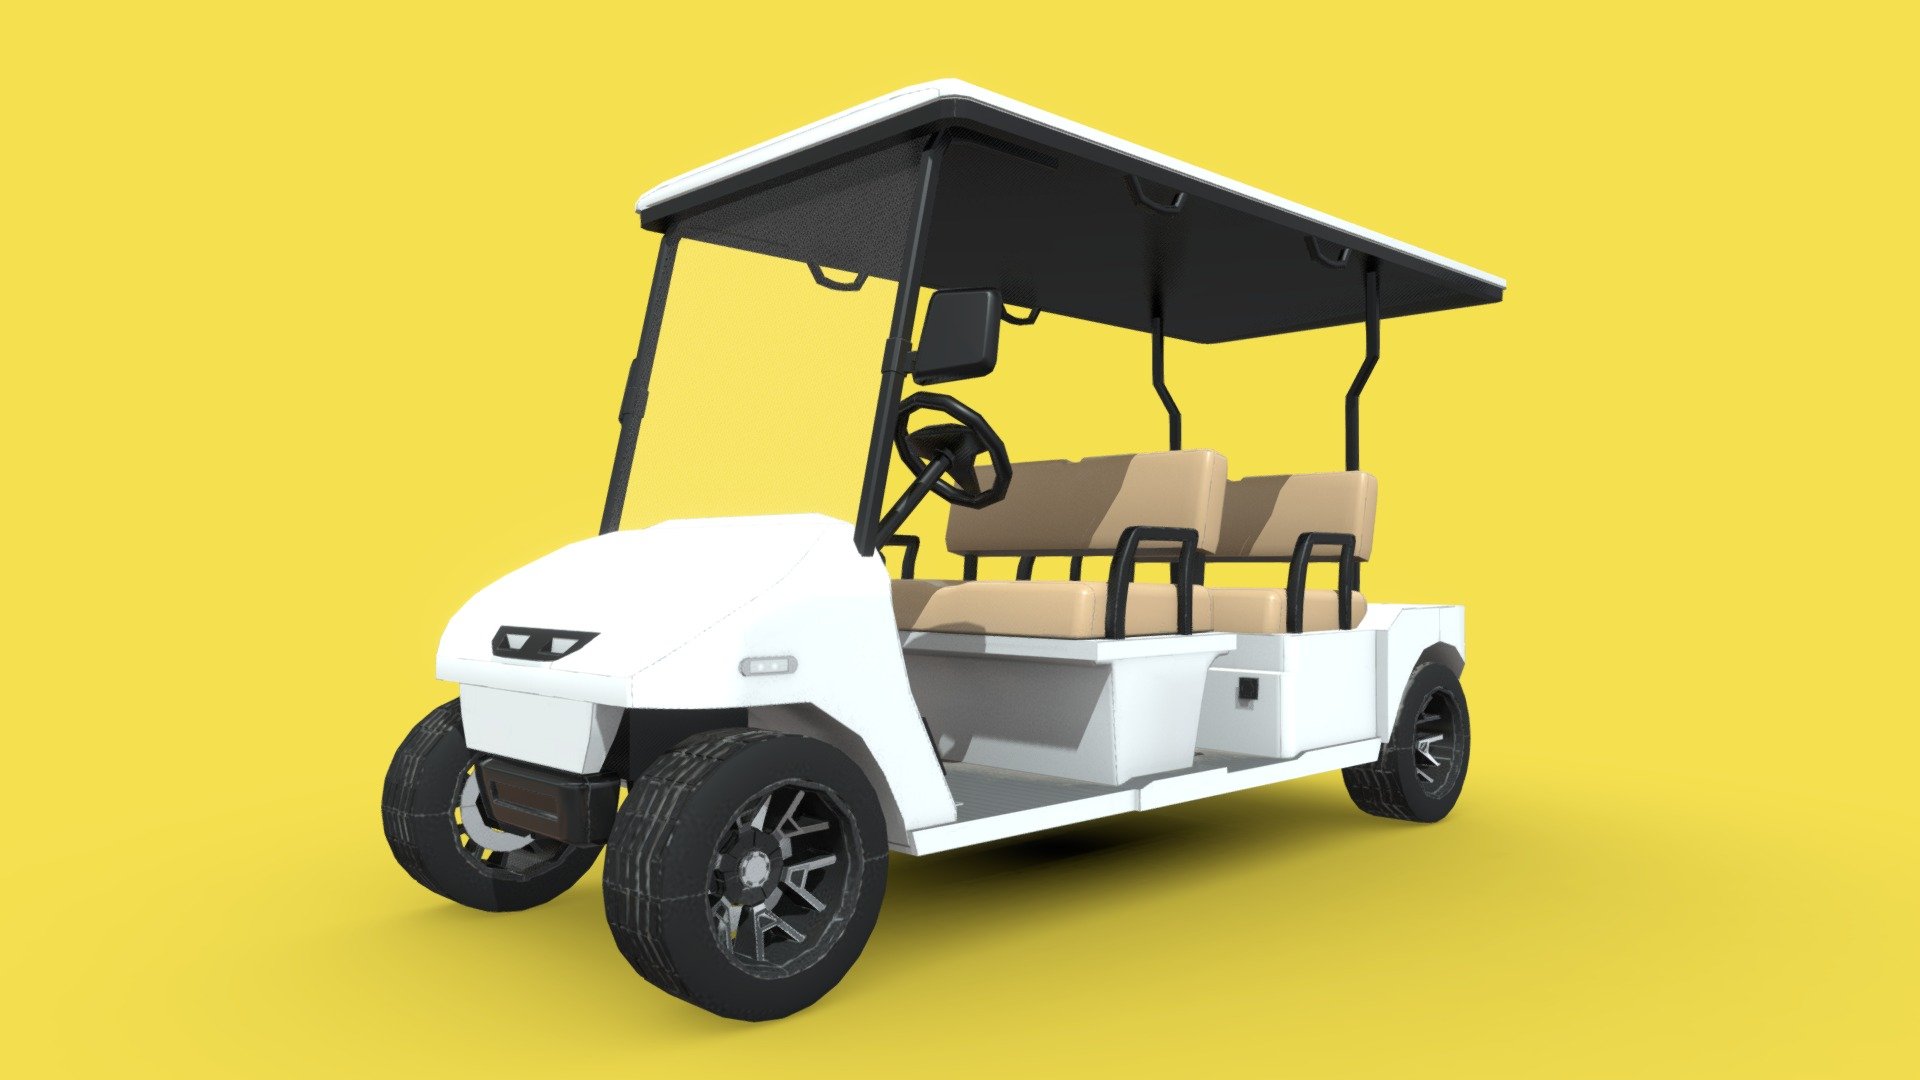 golf cart or golf buggy is a small vehicle designed originally to carry two golfers and their golf clubs around a golf course or on desert trails with less effort than walking.

If you like this 3d model, please like, comment and follow me.
subscribe me on Youtube: https://www.youtube.com/@jourverse?sub_confirmation=1 - Golf Cart - Download Free 3D model by Sengchor 3d model